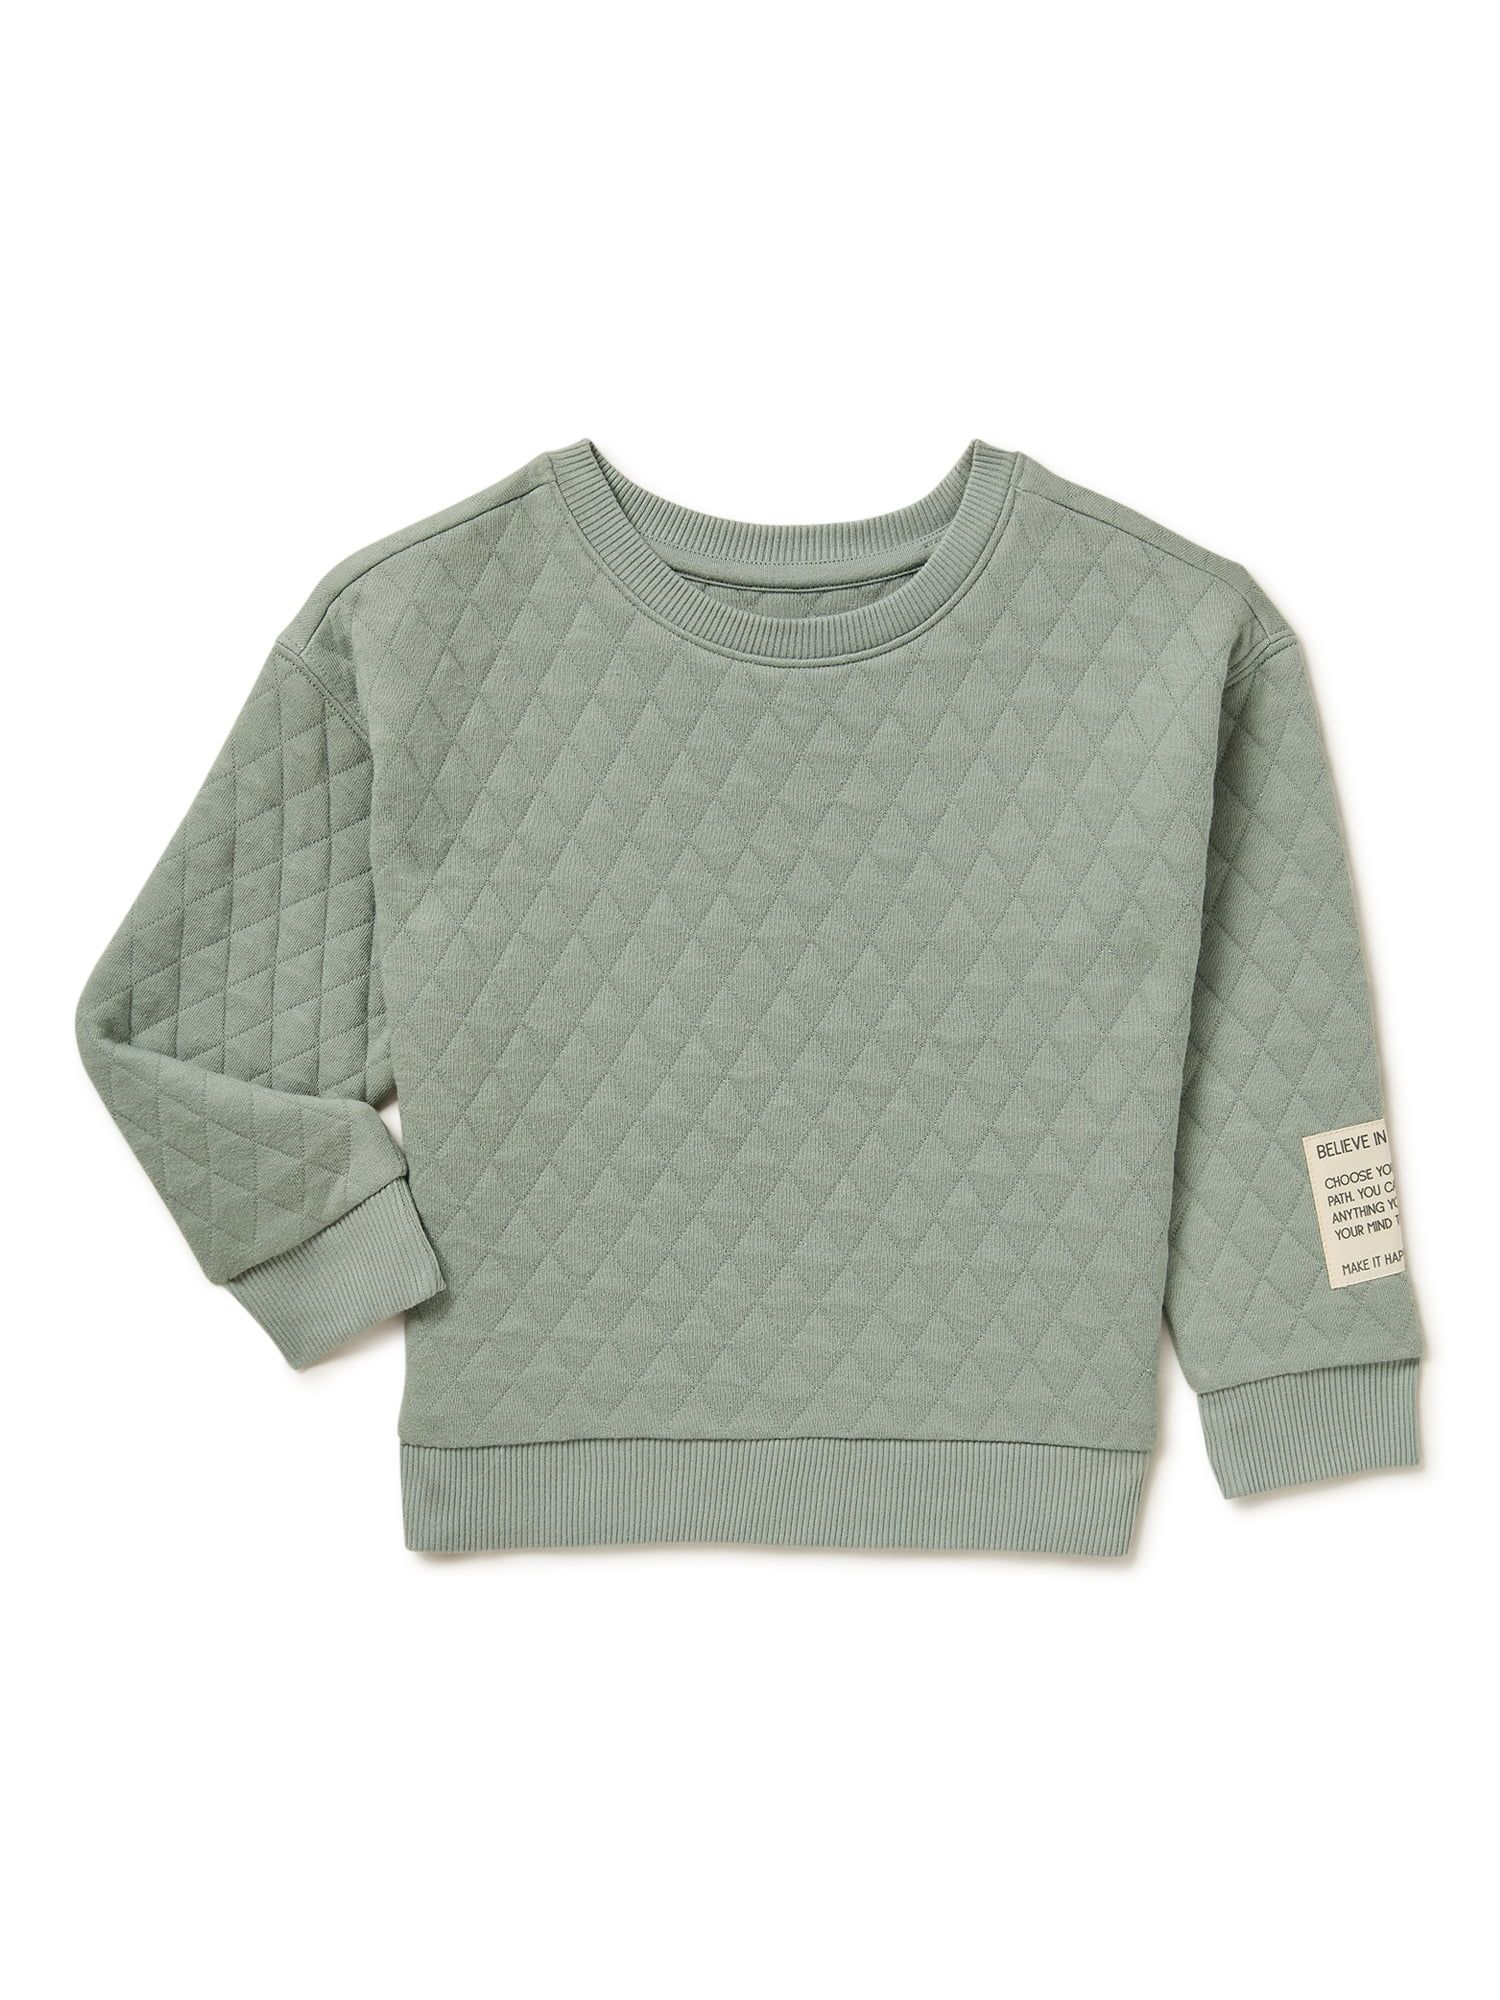 easy-peasy Baby and Toddler Girls Quilted Sweatshirt, Sizes 12 Months-5T | Walmart (US)